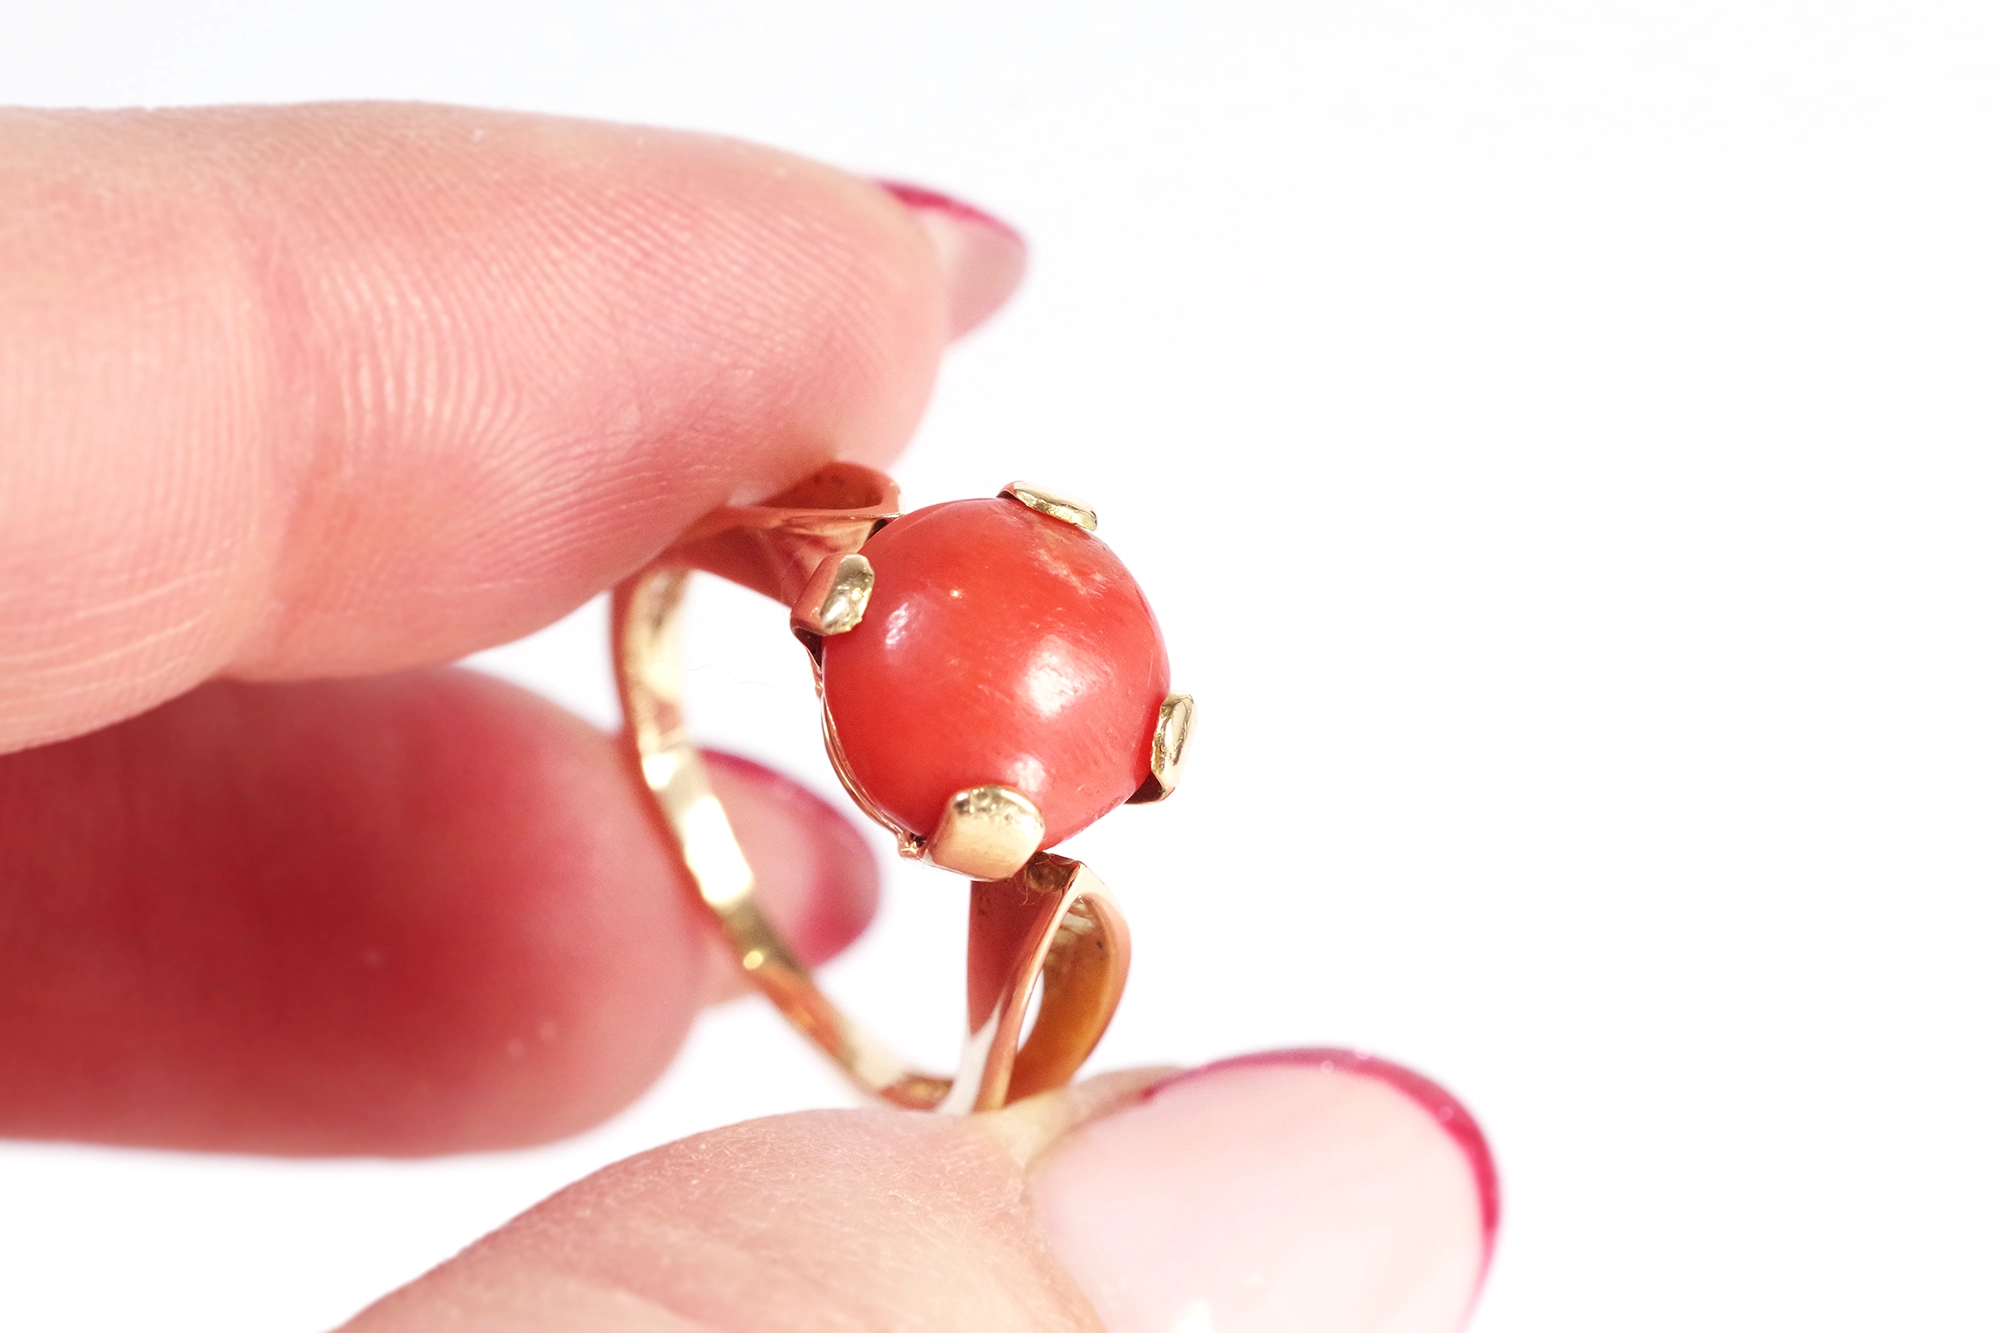 Can I wear a red coral stone on the left-hand ring finger? - Quora